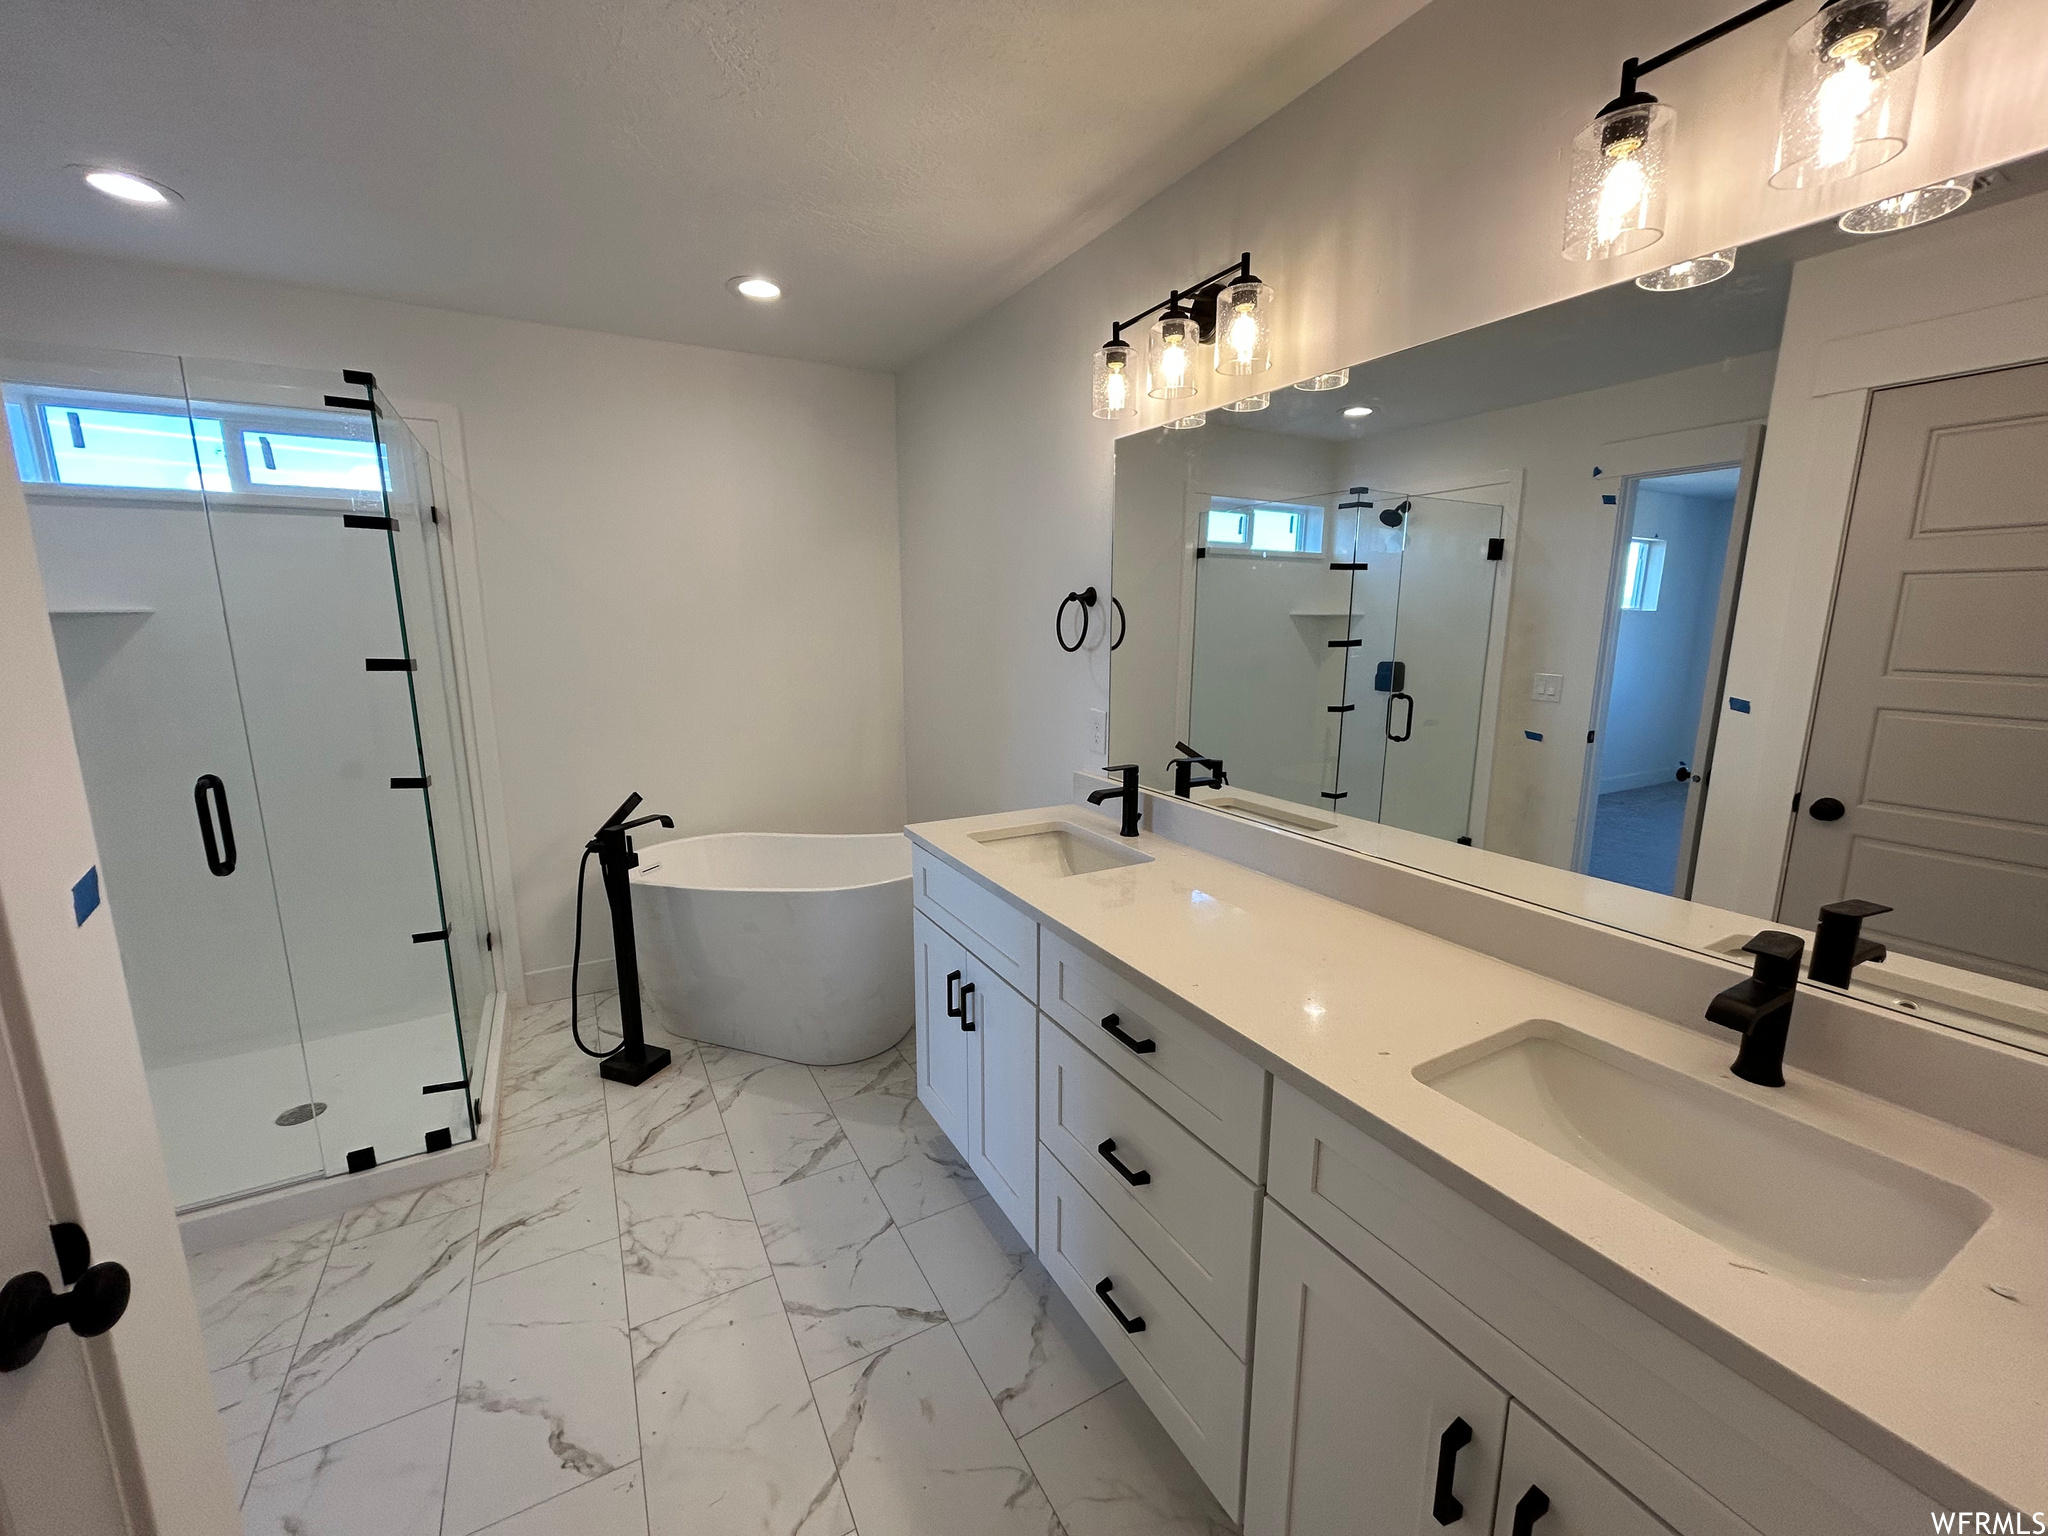 Bathroom featuring tile flooring, double sink, separate shower and tub, and oversized vanity